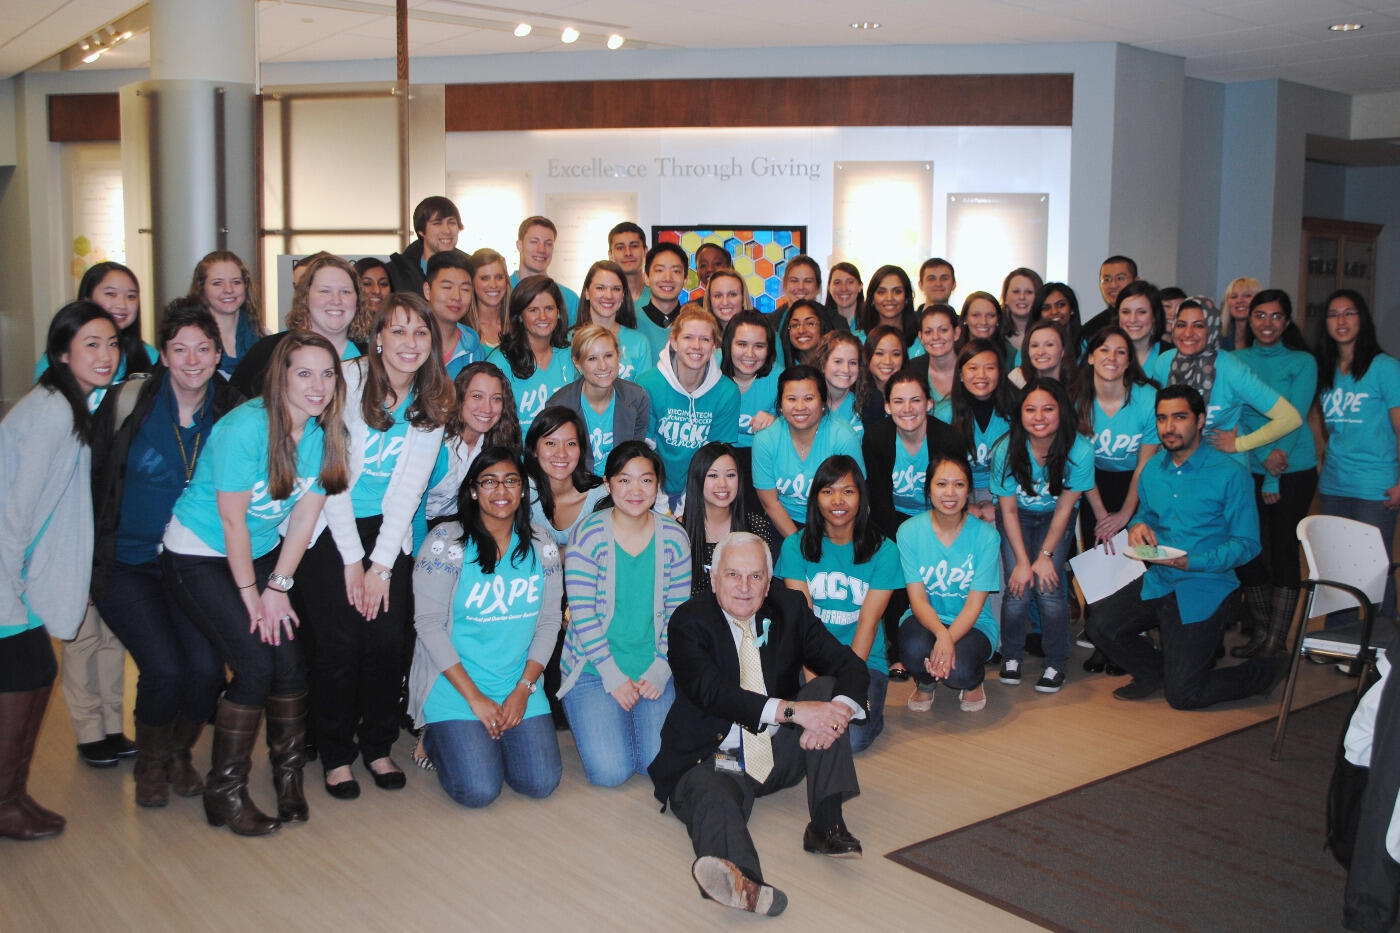 Yanchick with VCU School of Pharmacy students in 2013